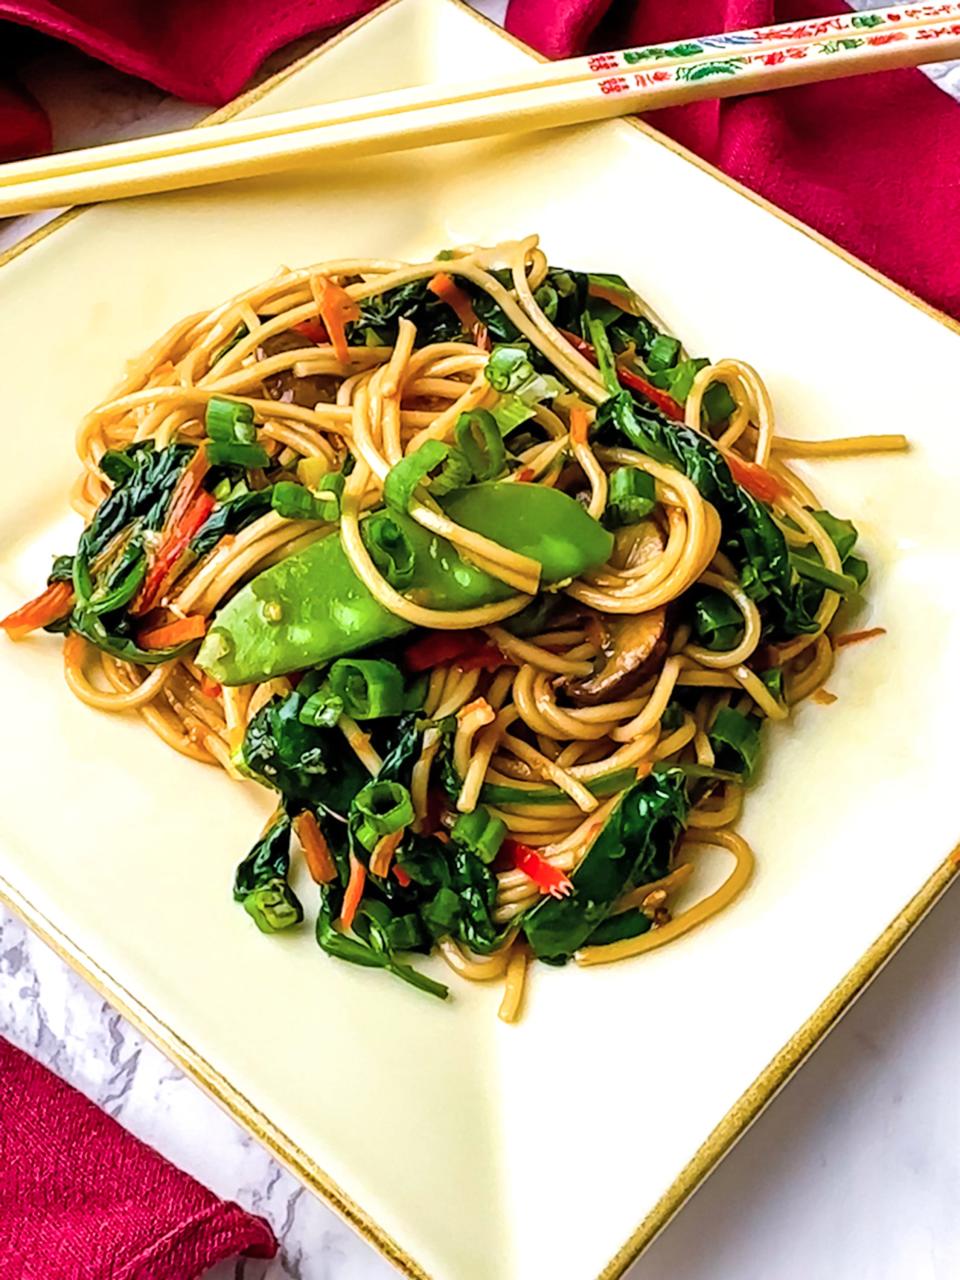 This homemade Veggie Lo Mein takes less than 15 minutes to cook and makes great leftovers.